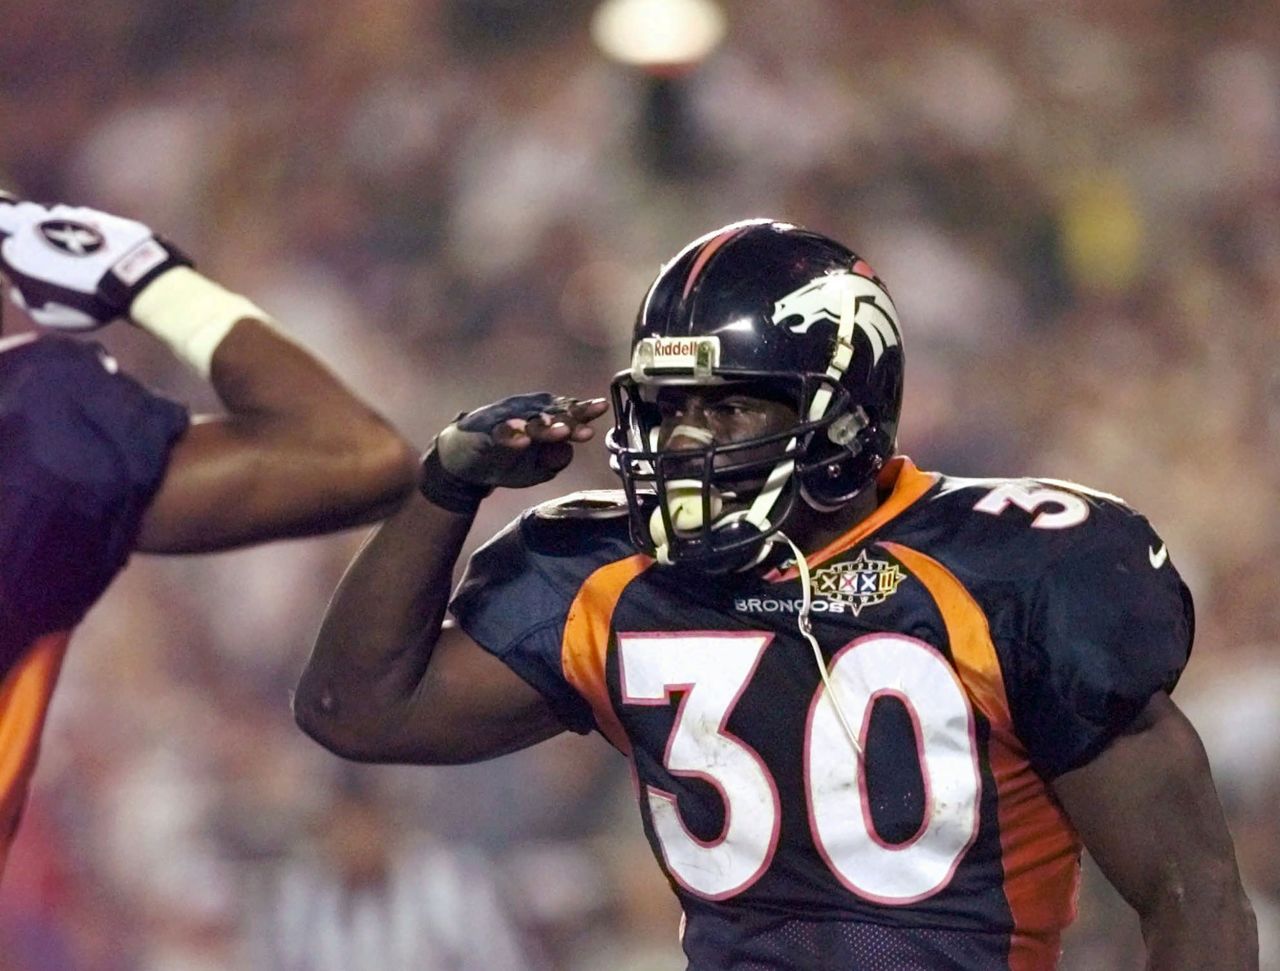 <strong>Super Bowl XXXII (1998):</strong> Denver Broncos running back Terrell Davis does his signature "Mile High Salute" after scoring a touchdown against Green Bay in Super Bowl XXXII. Davis rushed for 157 yards and three touchdowns on his way to winning MVP.